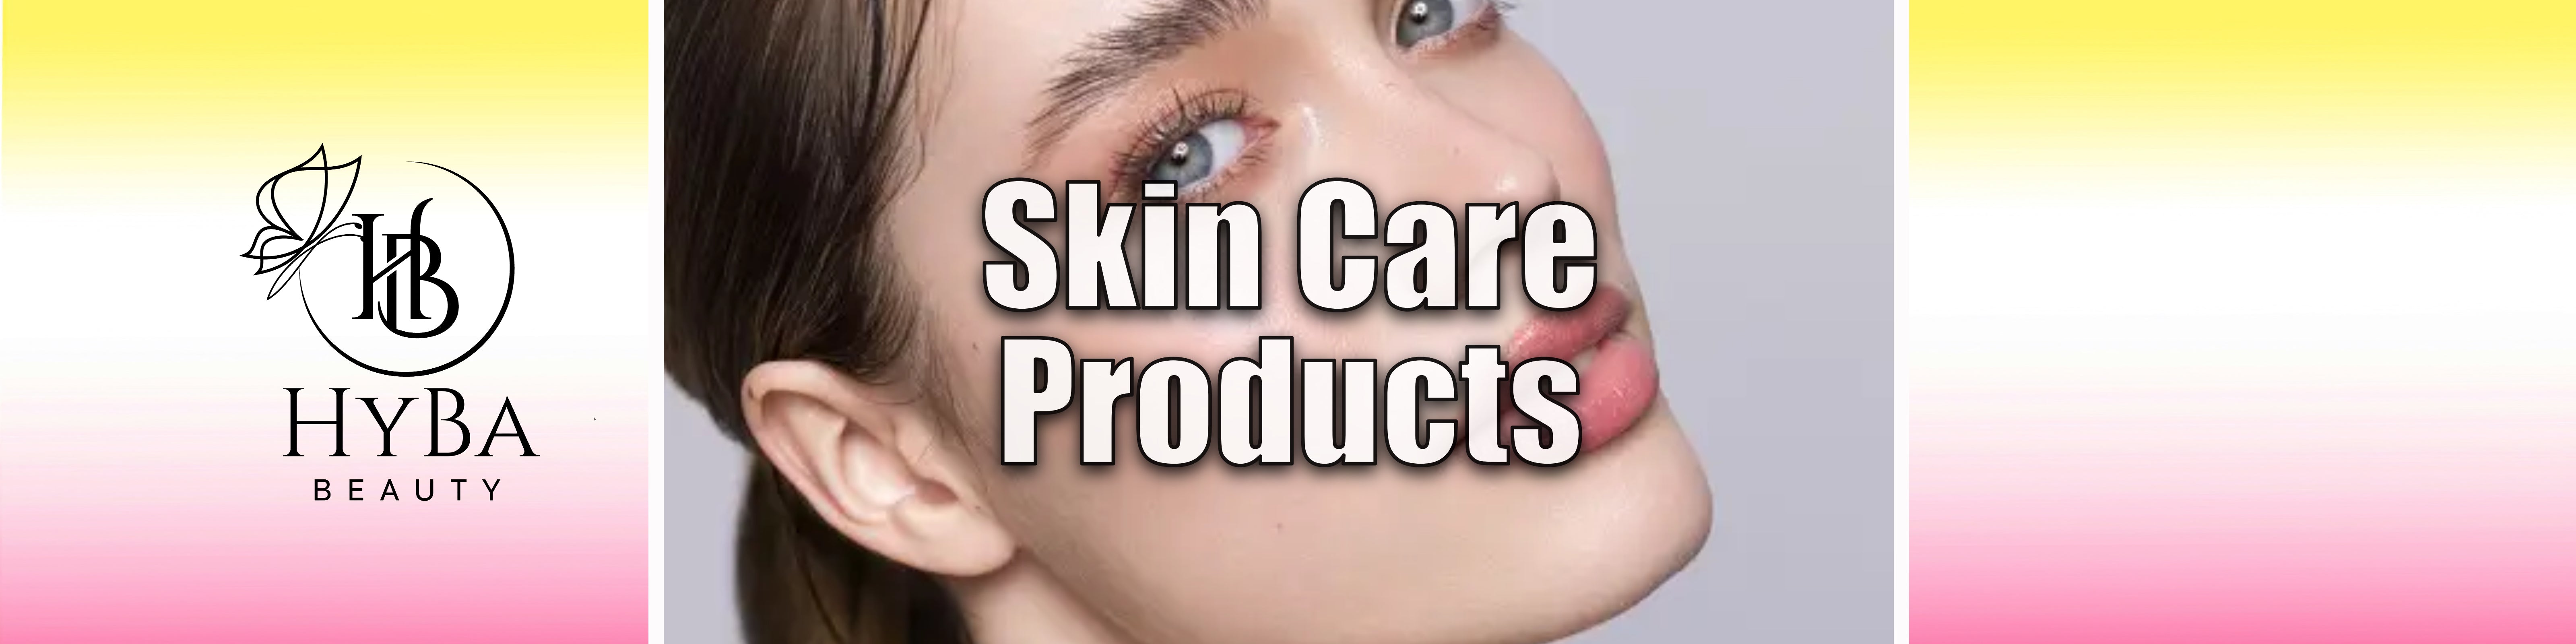 SKIN CARE PRODUCTS